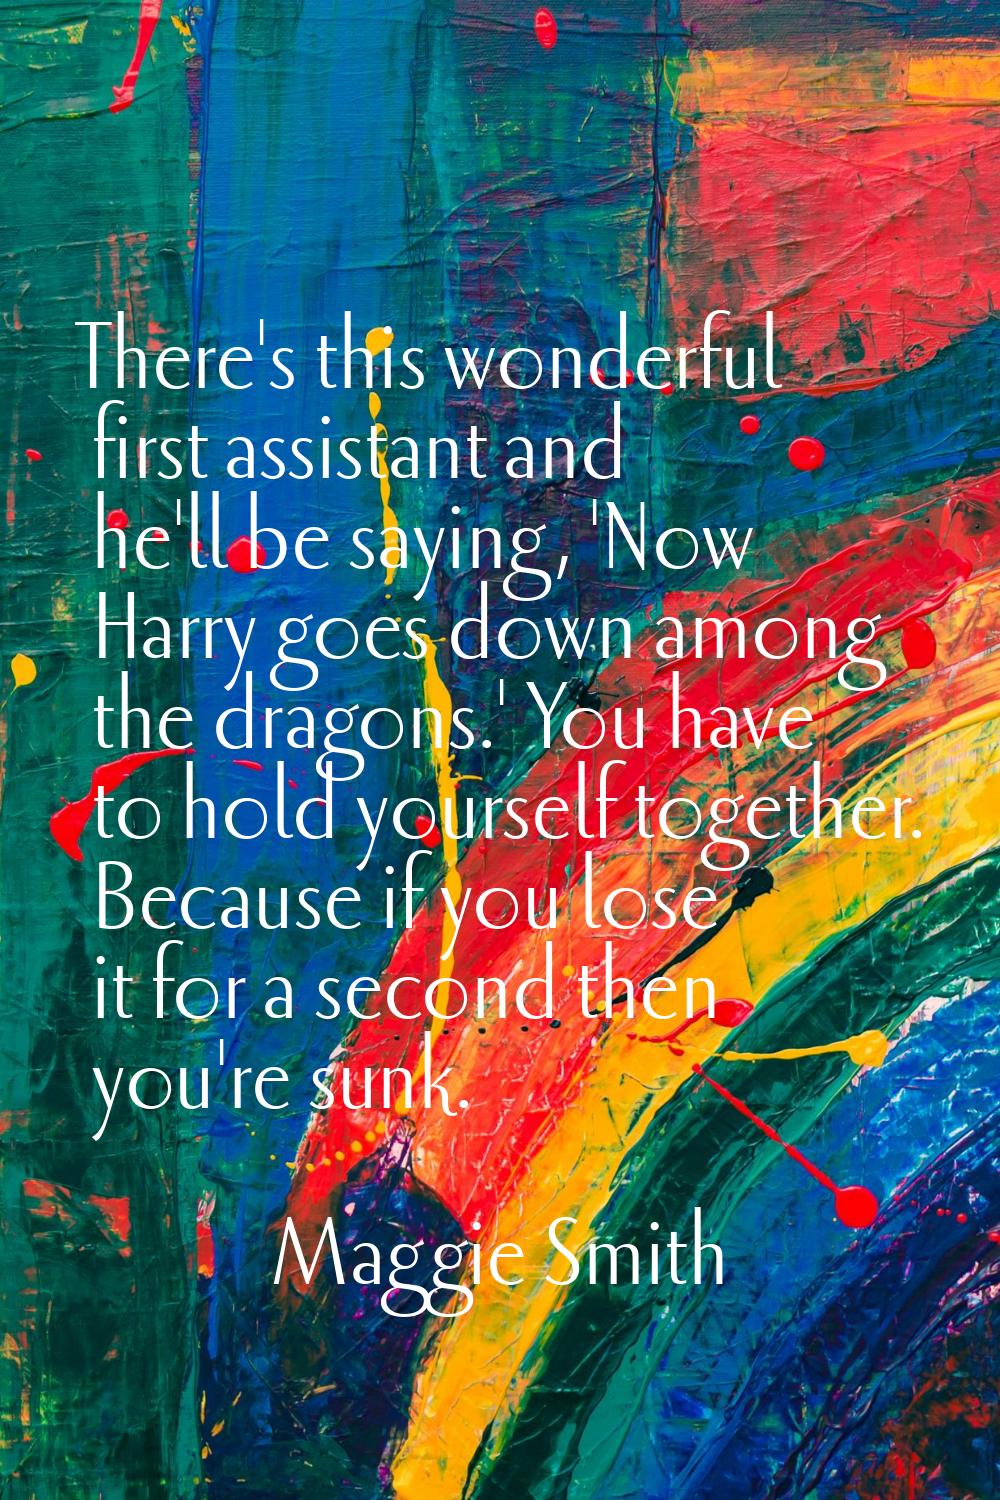 There's this wonderful first assistant and he'll be saying, 'Now Harry goes down among the dragons.